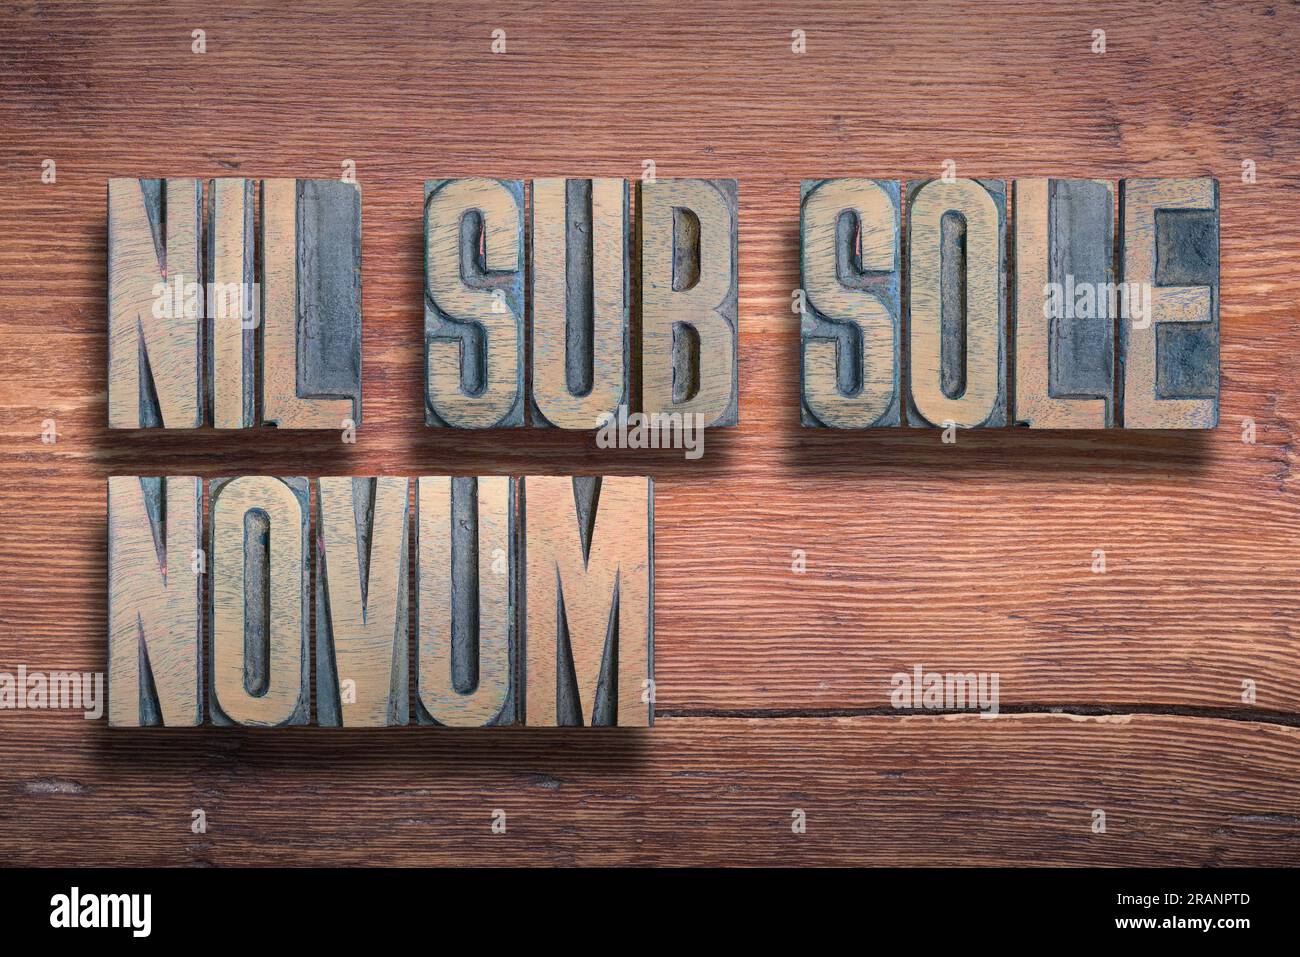 Nil sub sole novum, ancient Latin phrase meaning, Nothing is new under the sun, combined on vintage varnished wooden surface Stock Photo